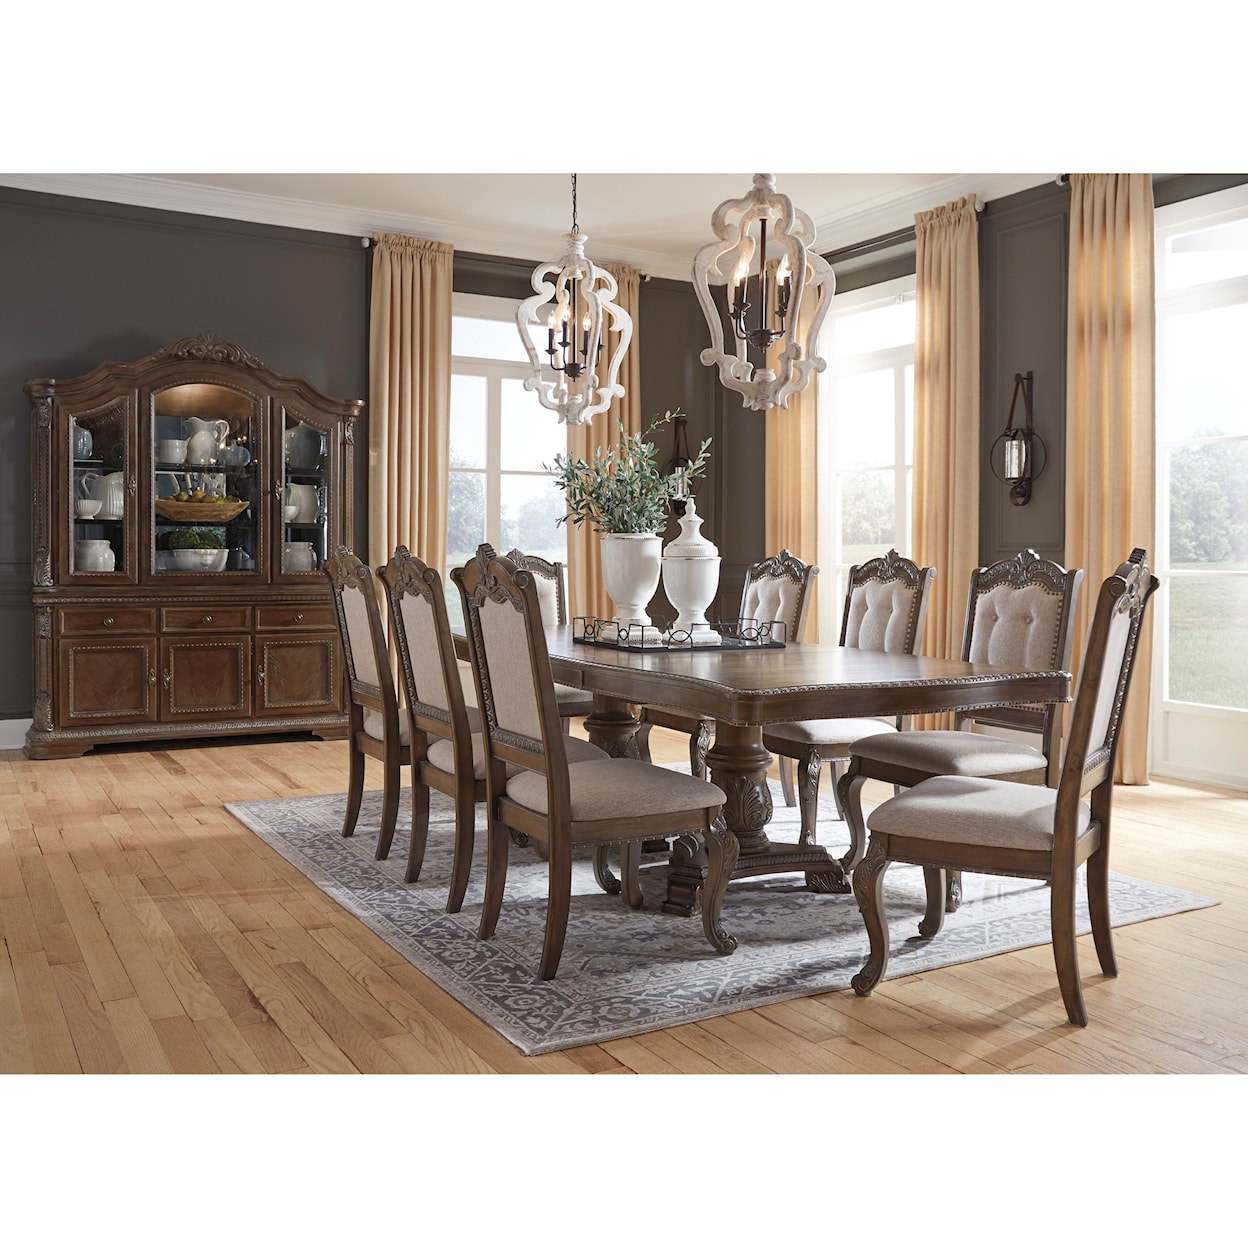 Signature Design by Ashley Charmond Formal Dining Room Group